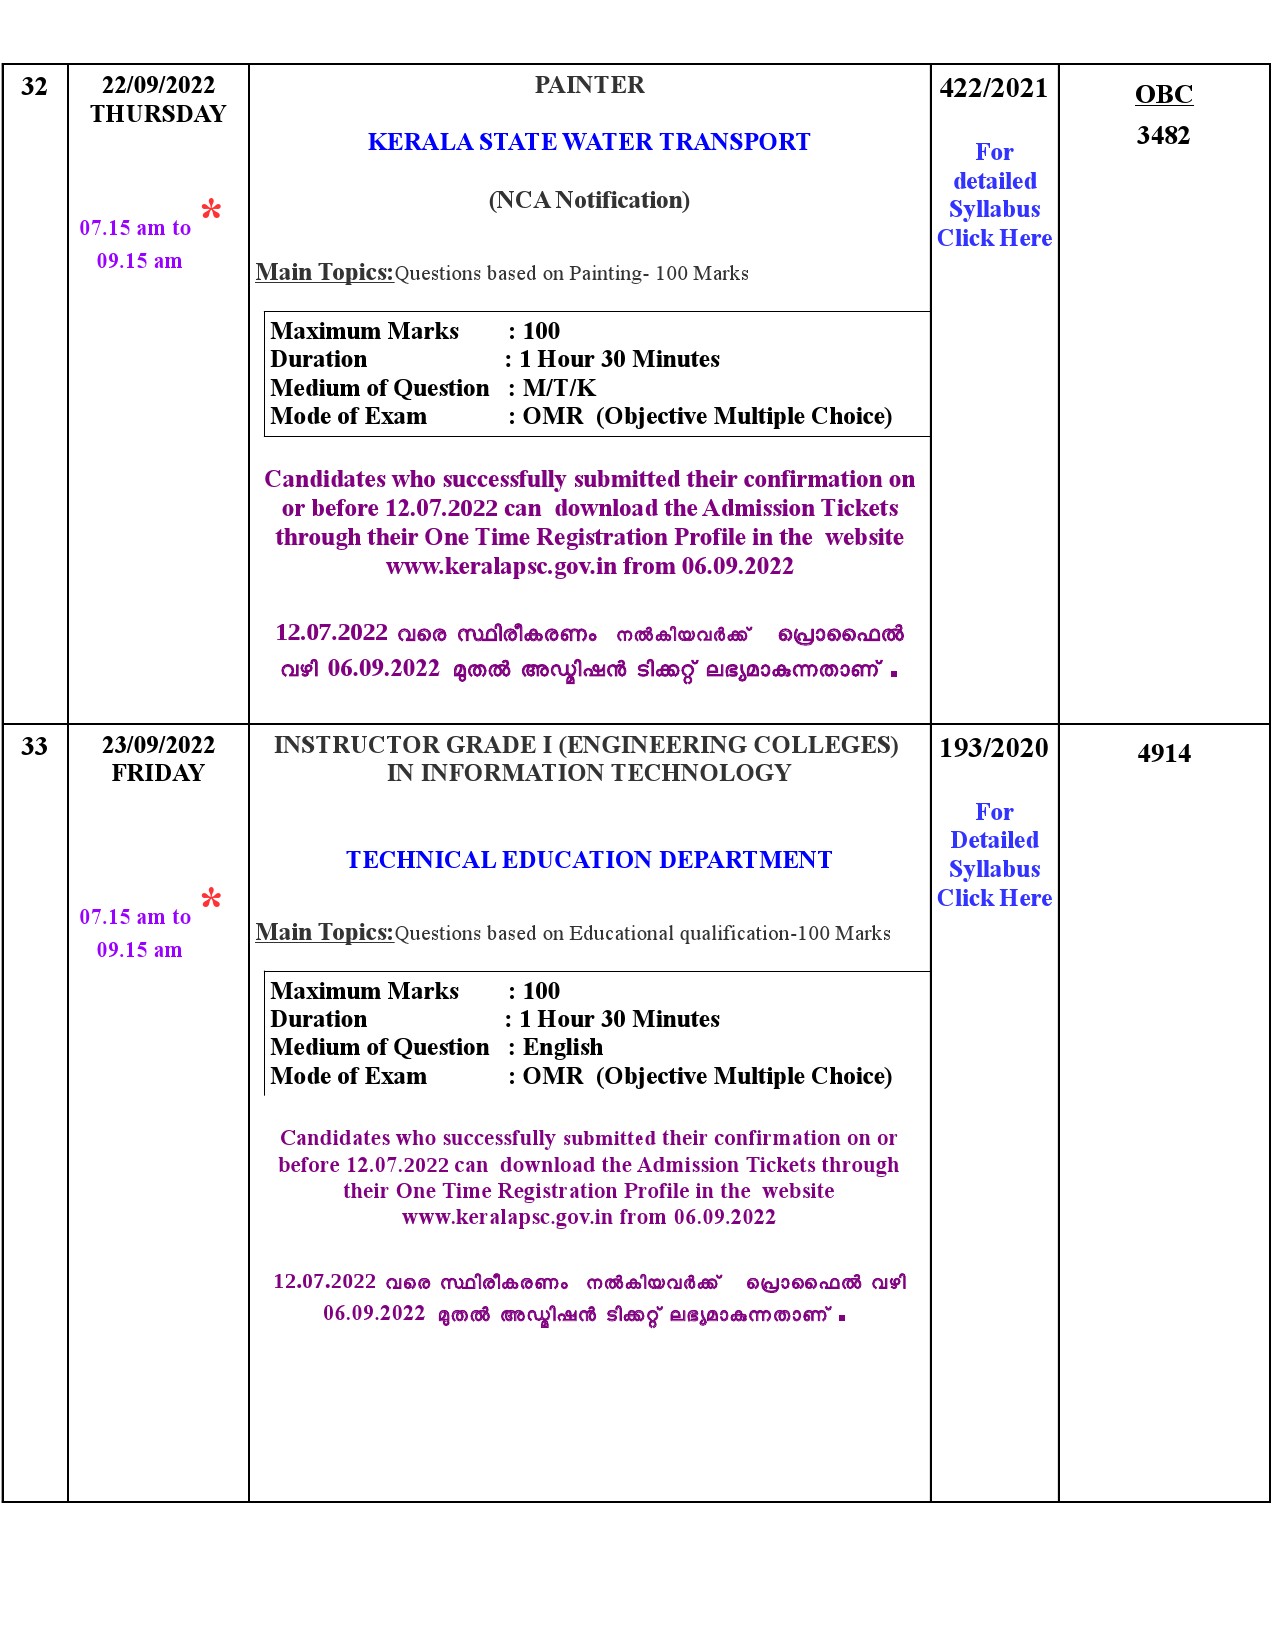 Examination Programme For The Month Of September 2022 - Notification Image 14